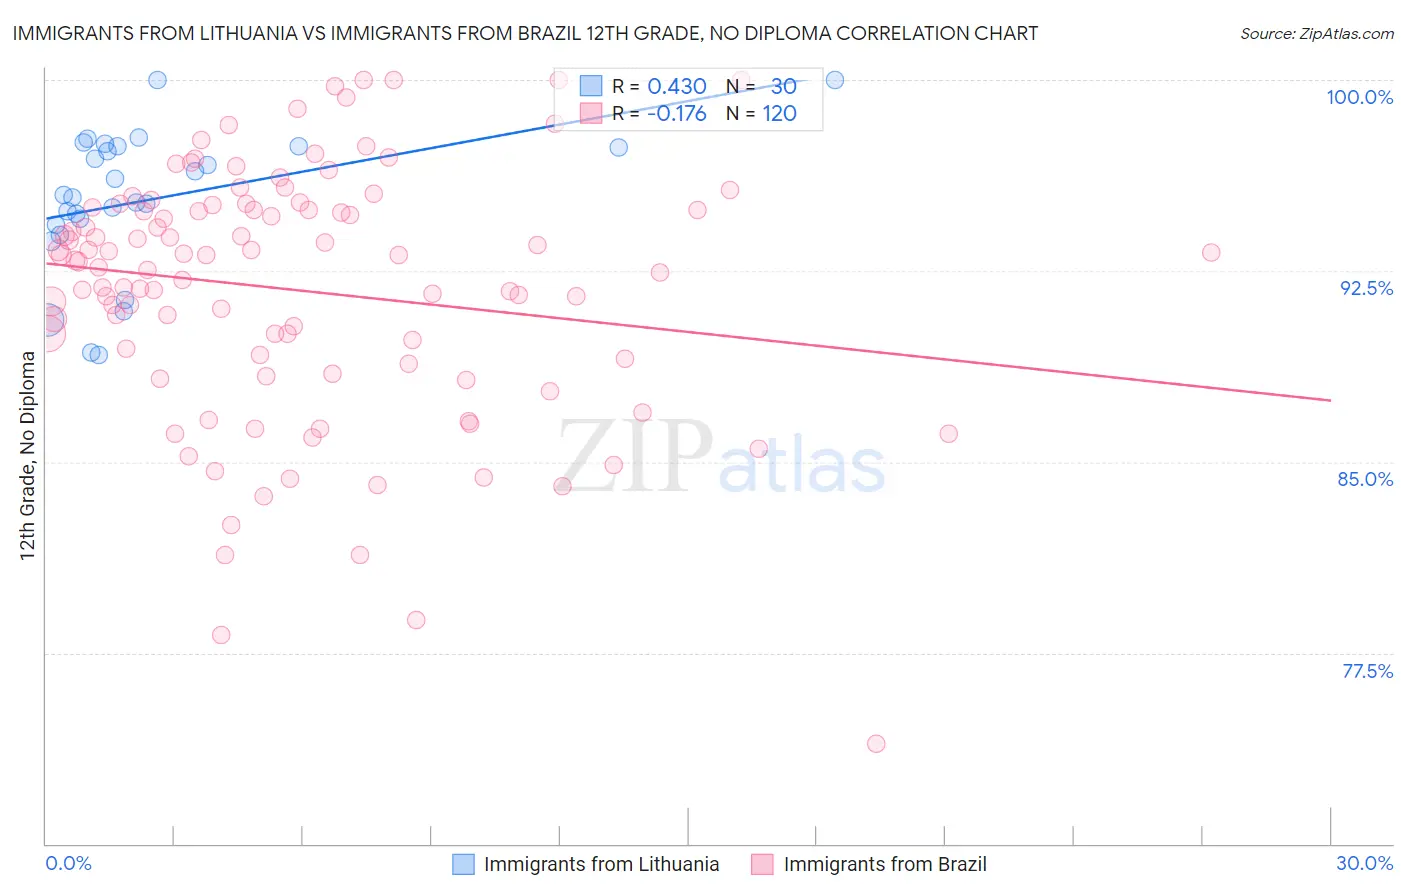 Immigrants from Lithuania vs Immigrants from Brazil 12th Grade, No Diploma